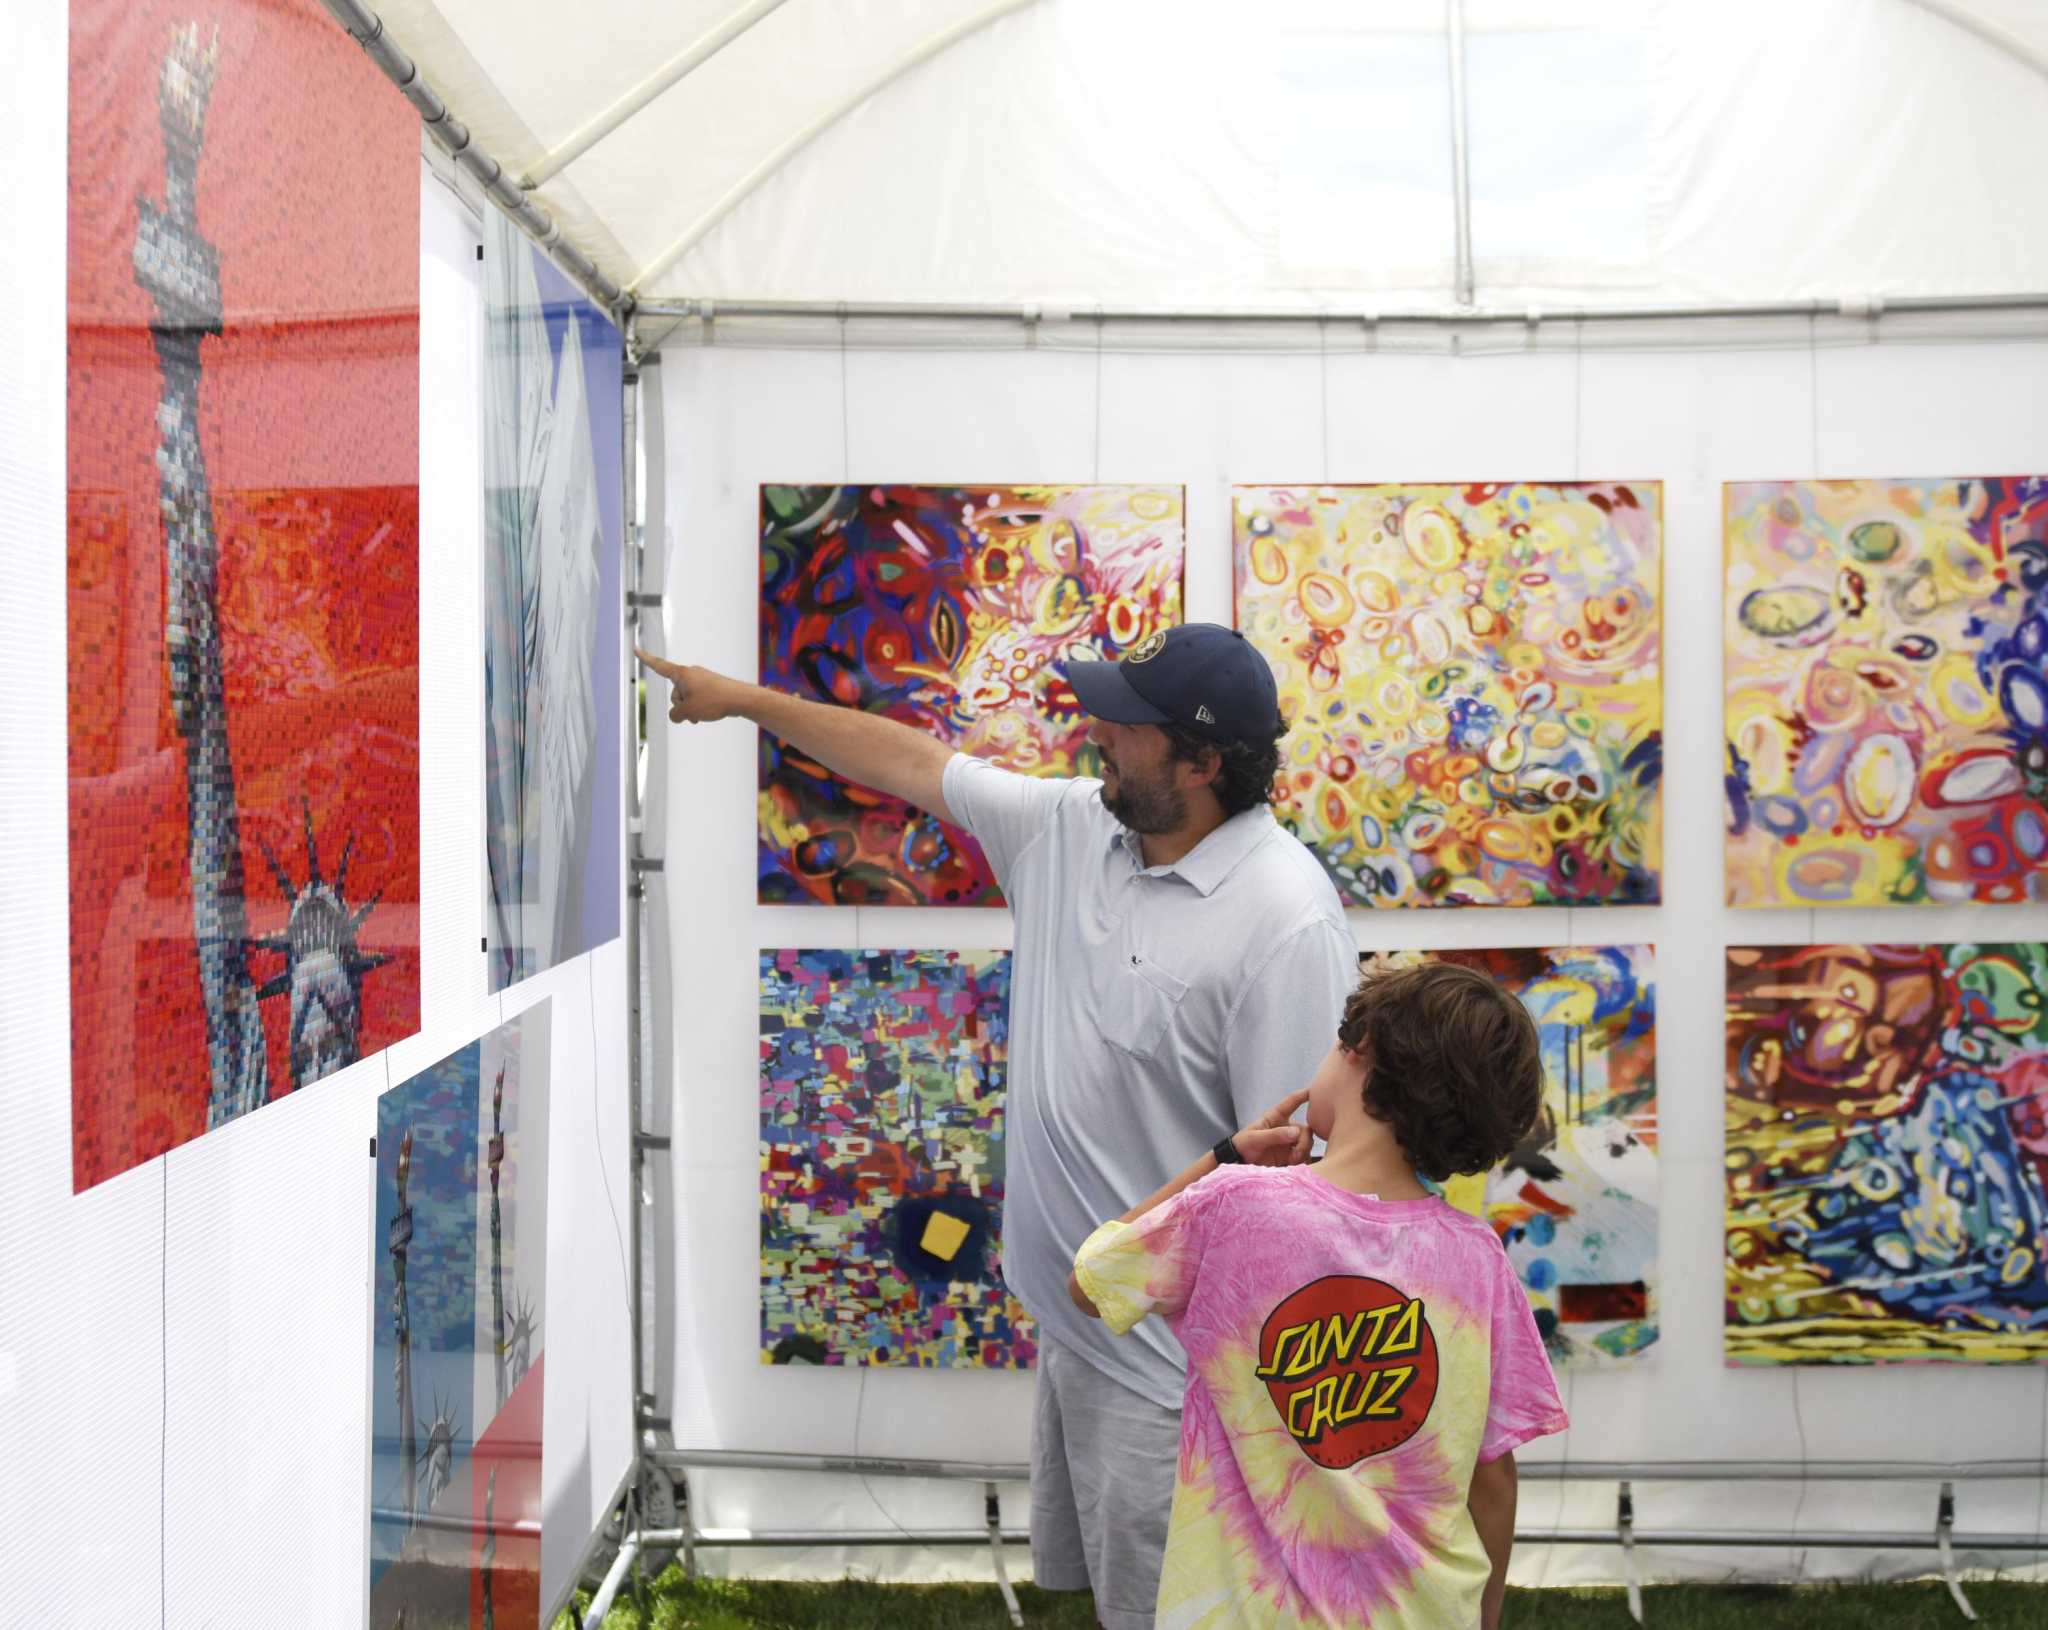 In photos Stamford Art Festival draws crowds to Harbor Point